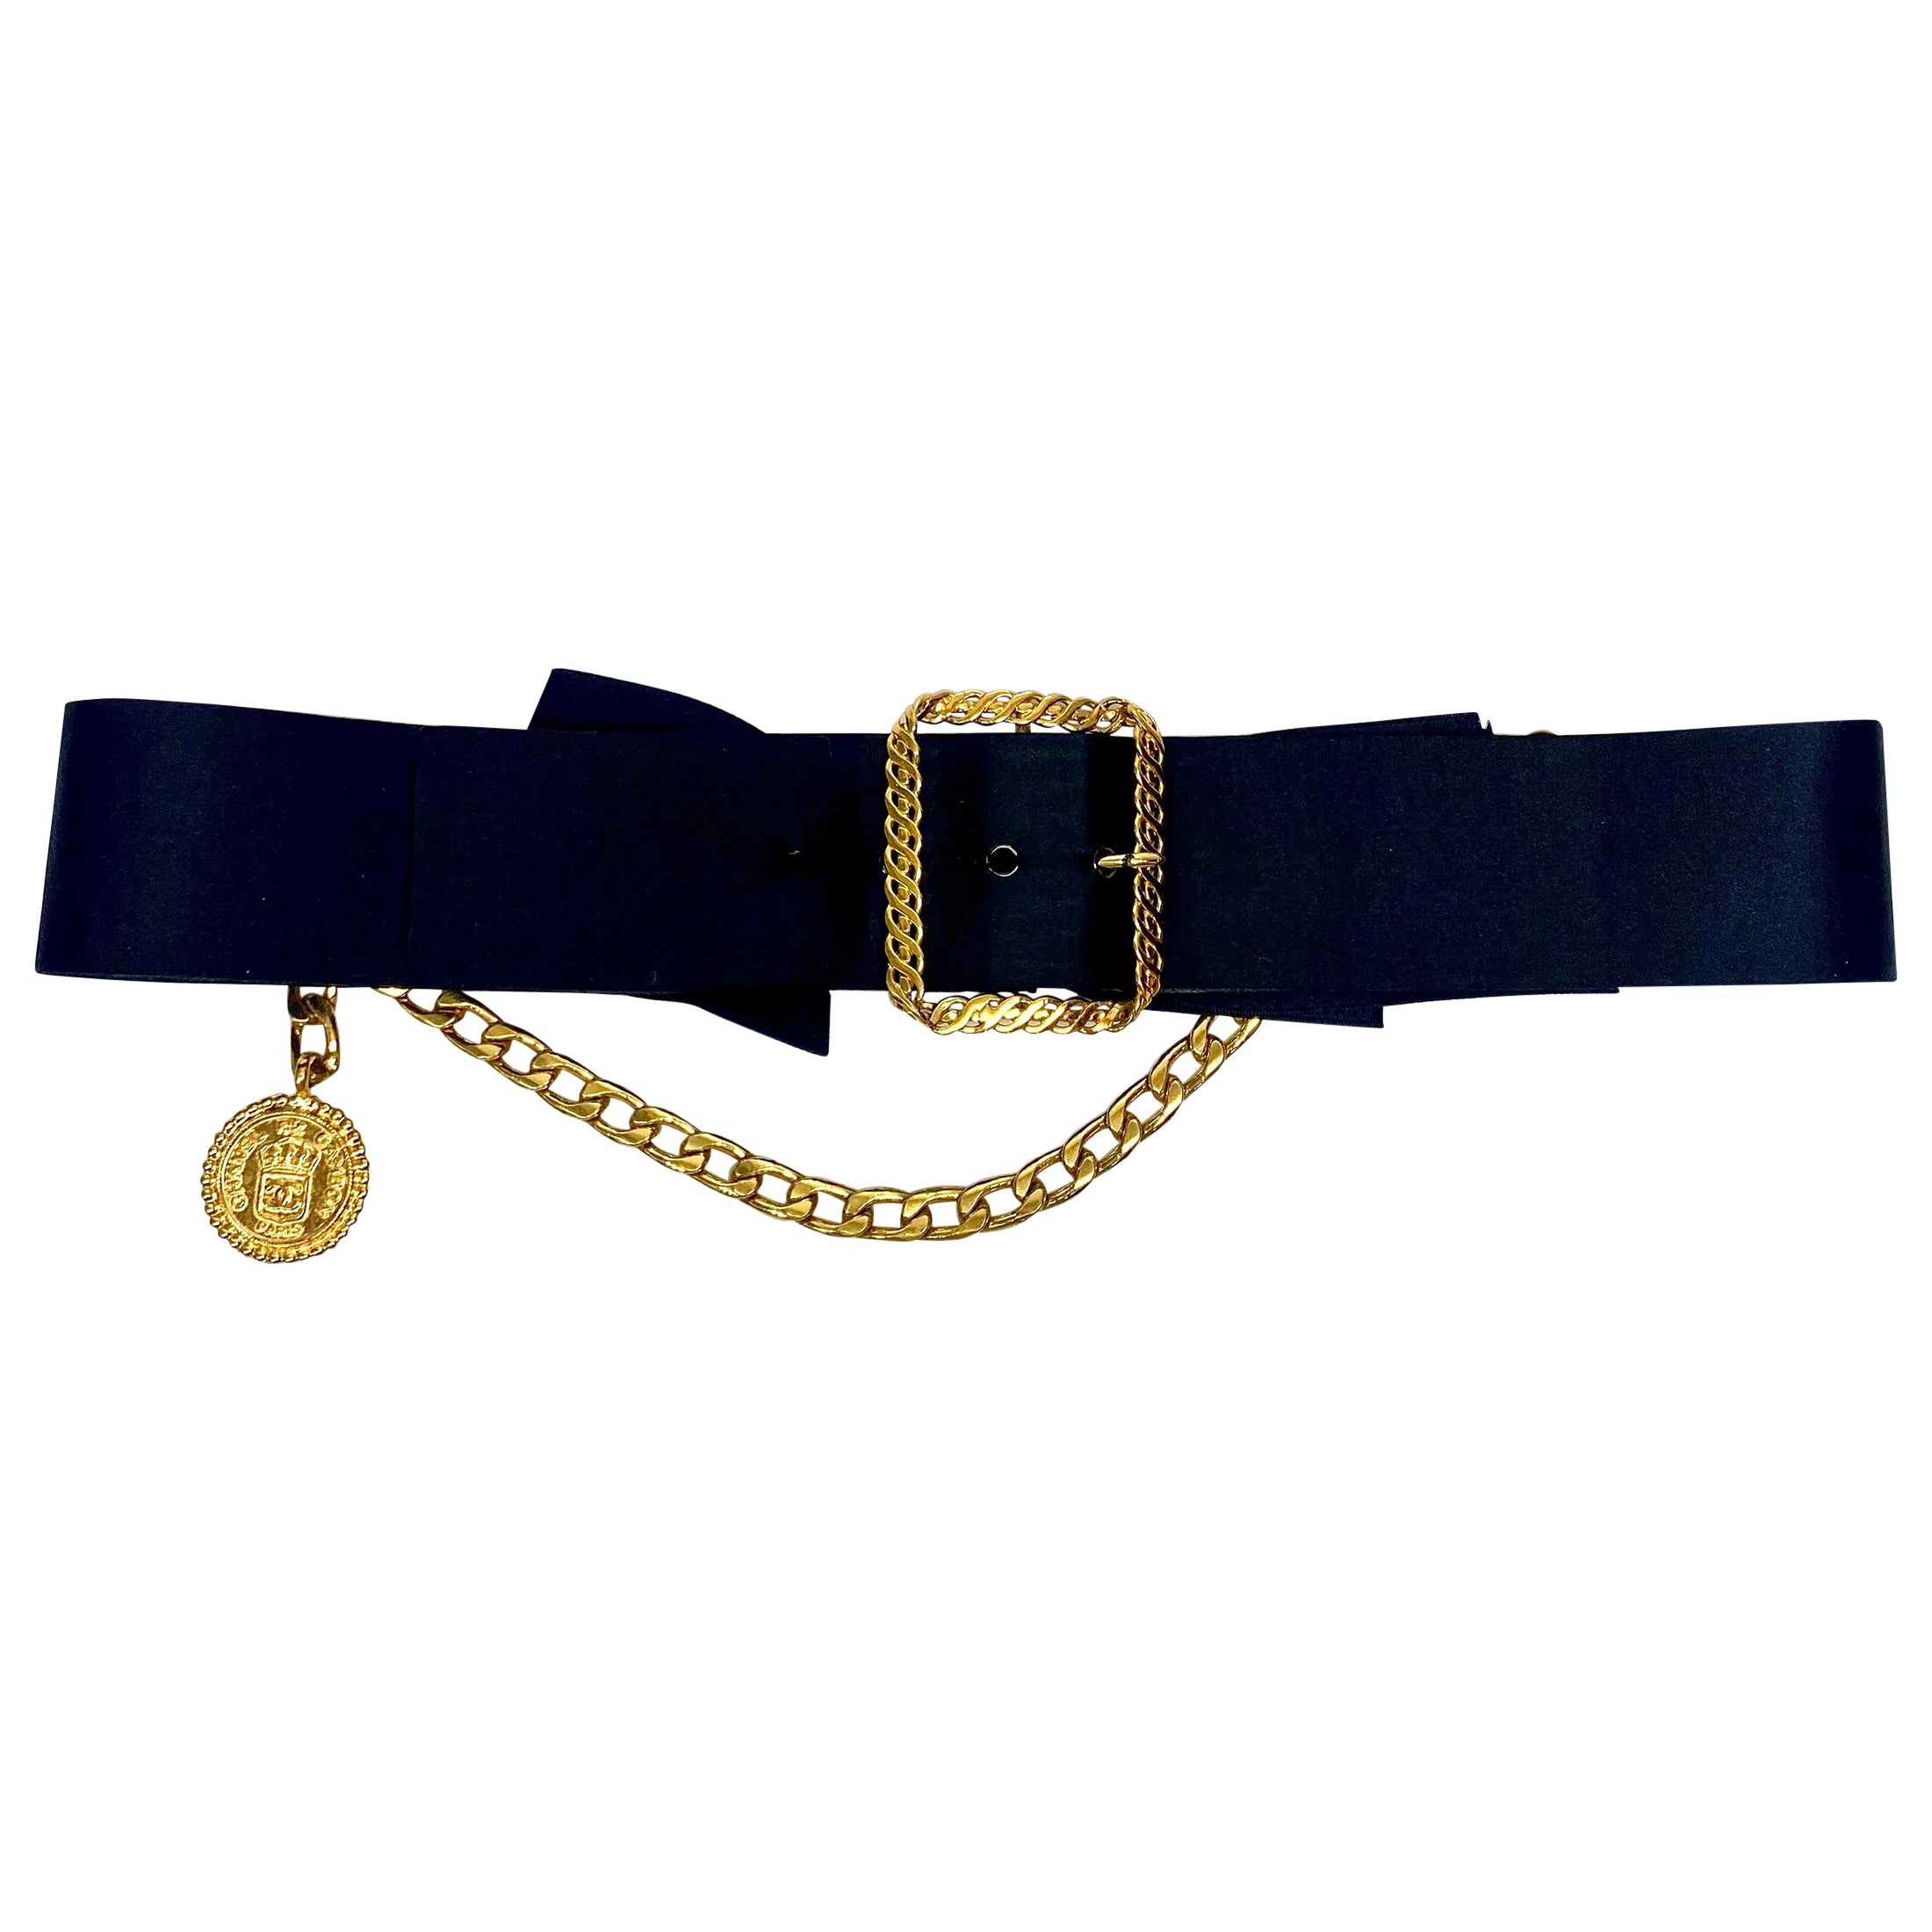 Chanel Vintage Black Satin Bow with Gold Buckle, Chain and Medalion Belt  For Sale